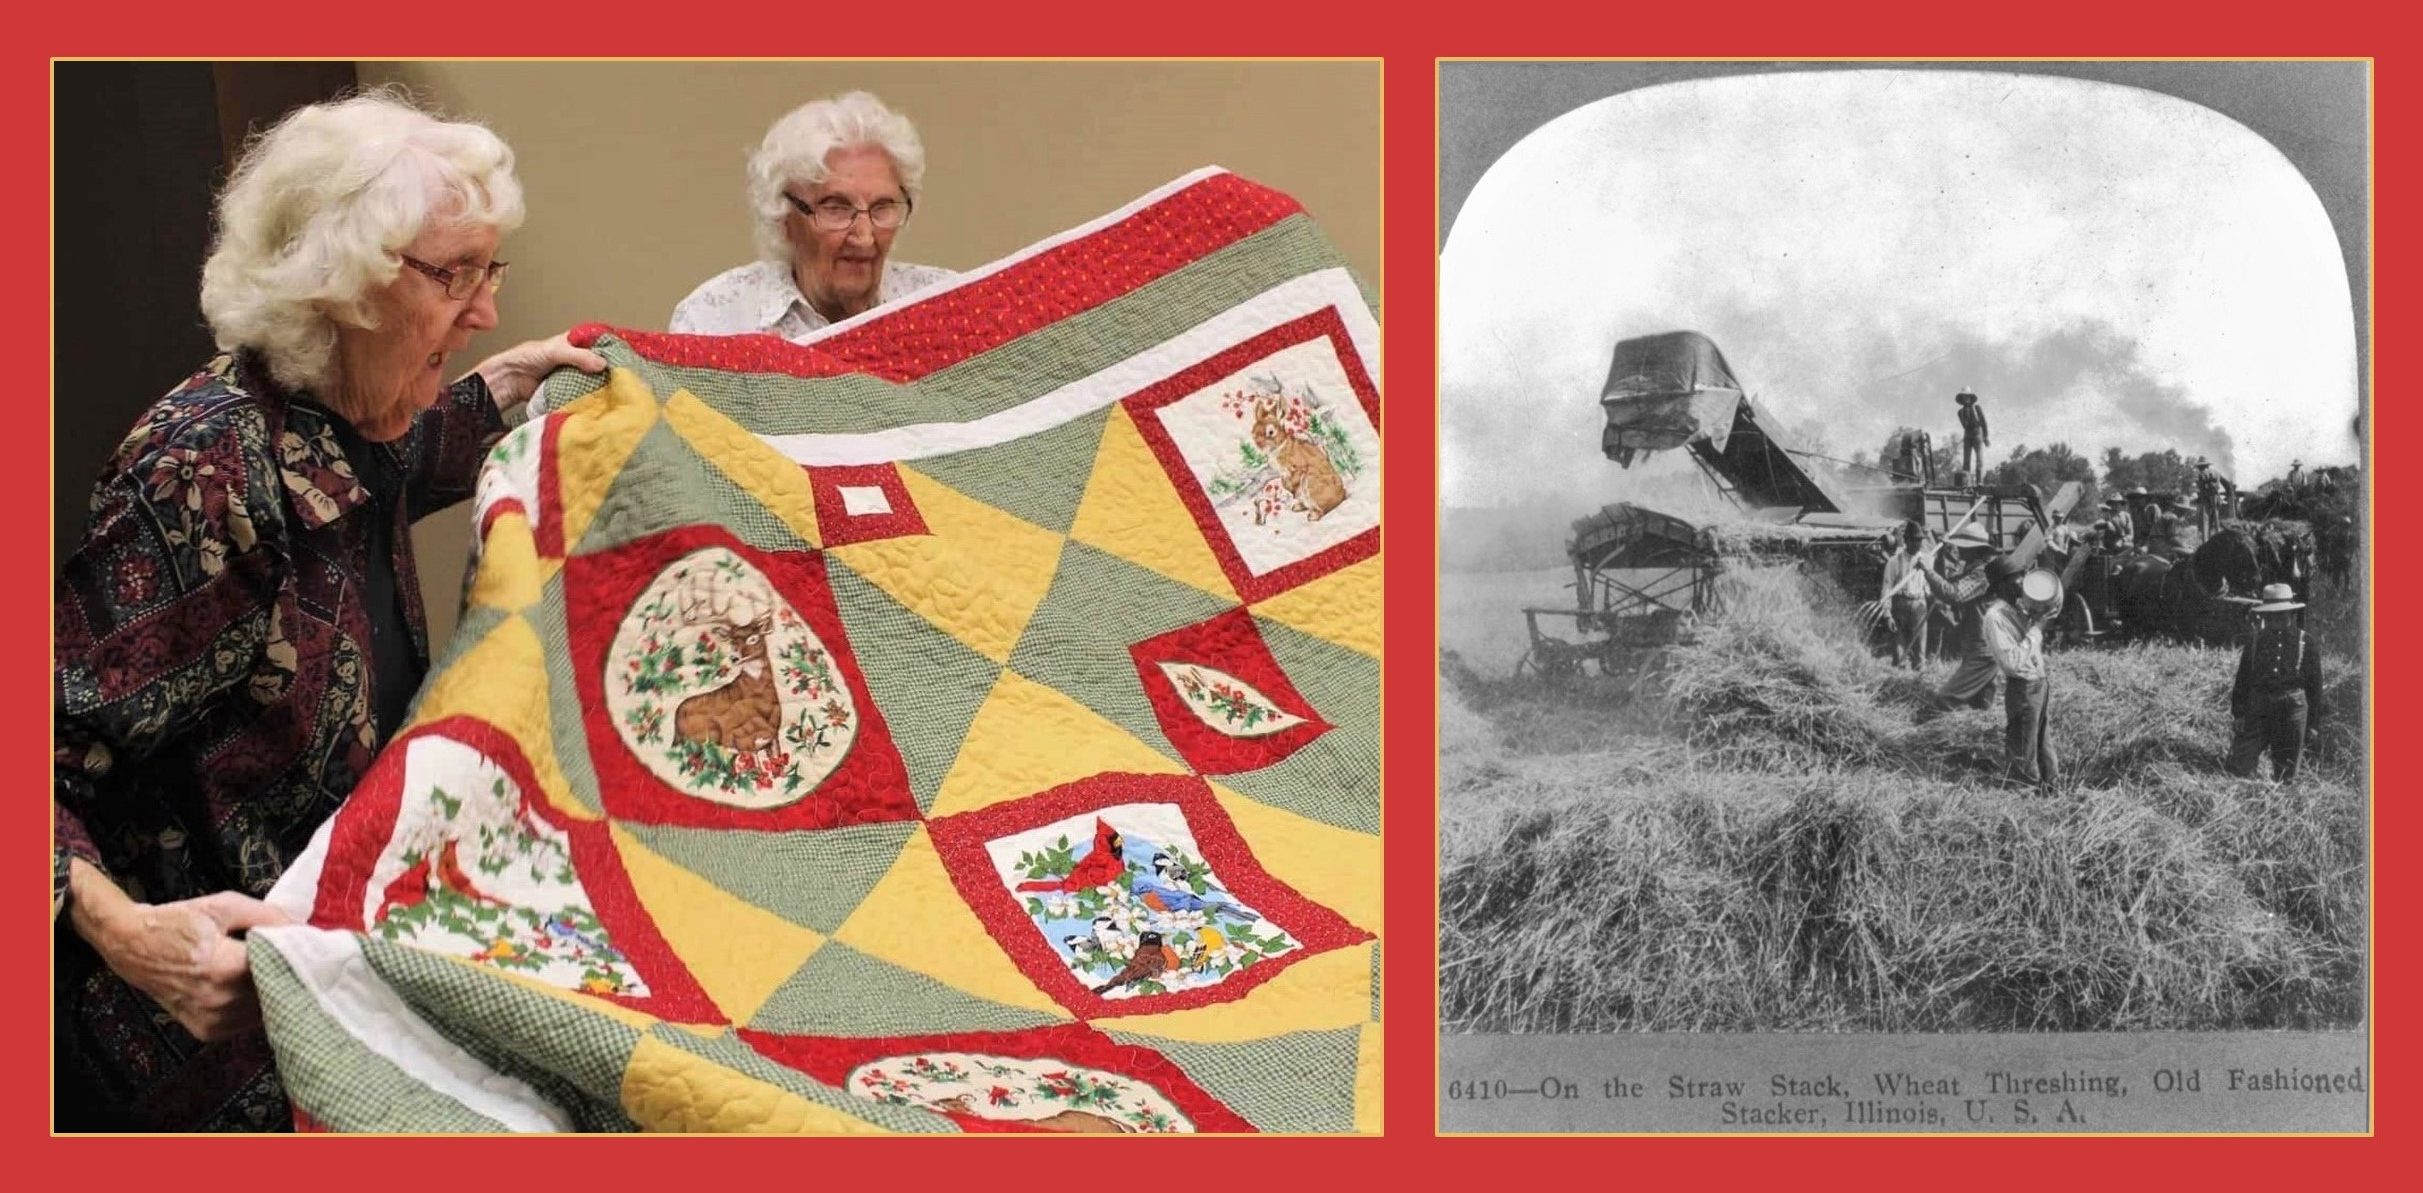 Right: Photograph of two quilters in Marshall, IL. Left: Early-20th-c. image of wheat threshing, rural IL.